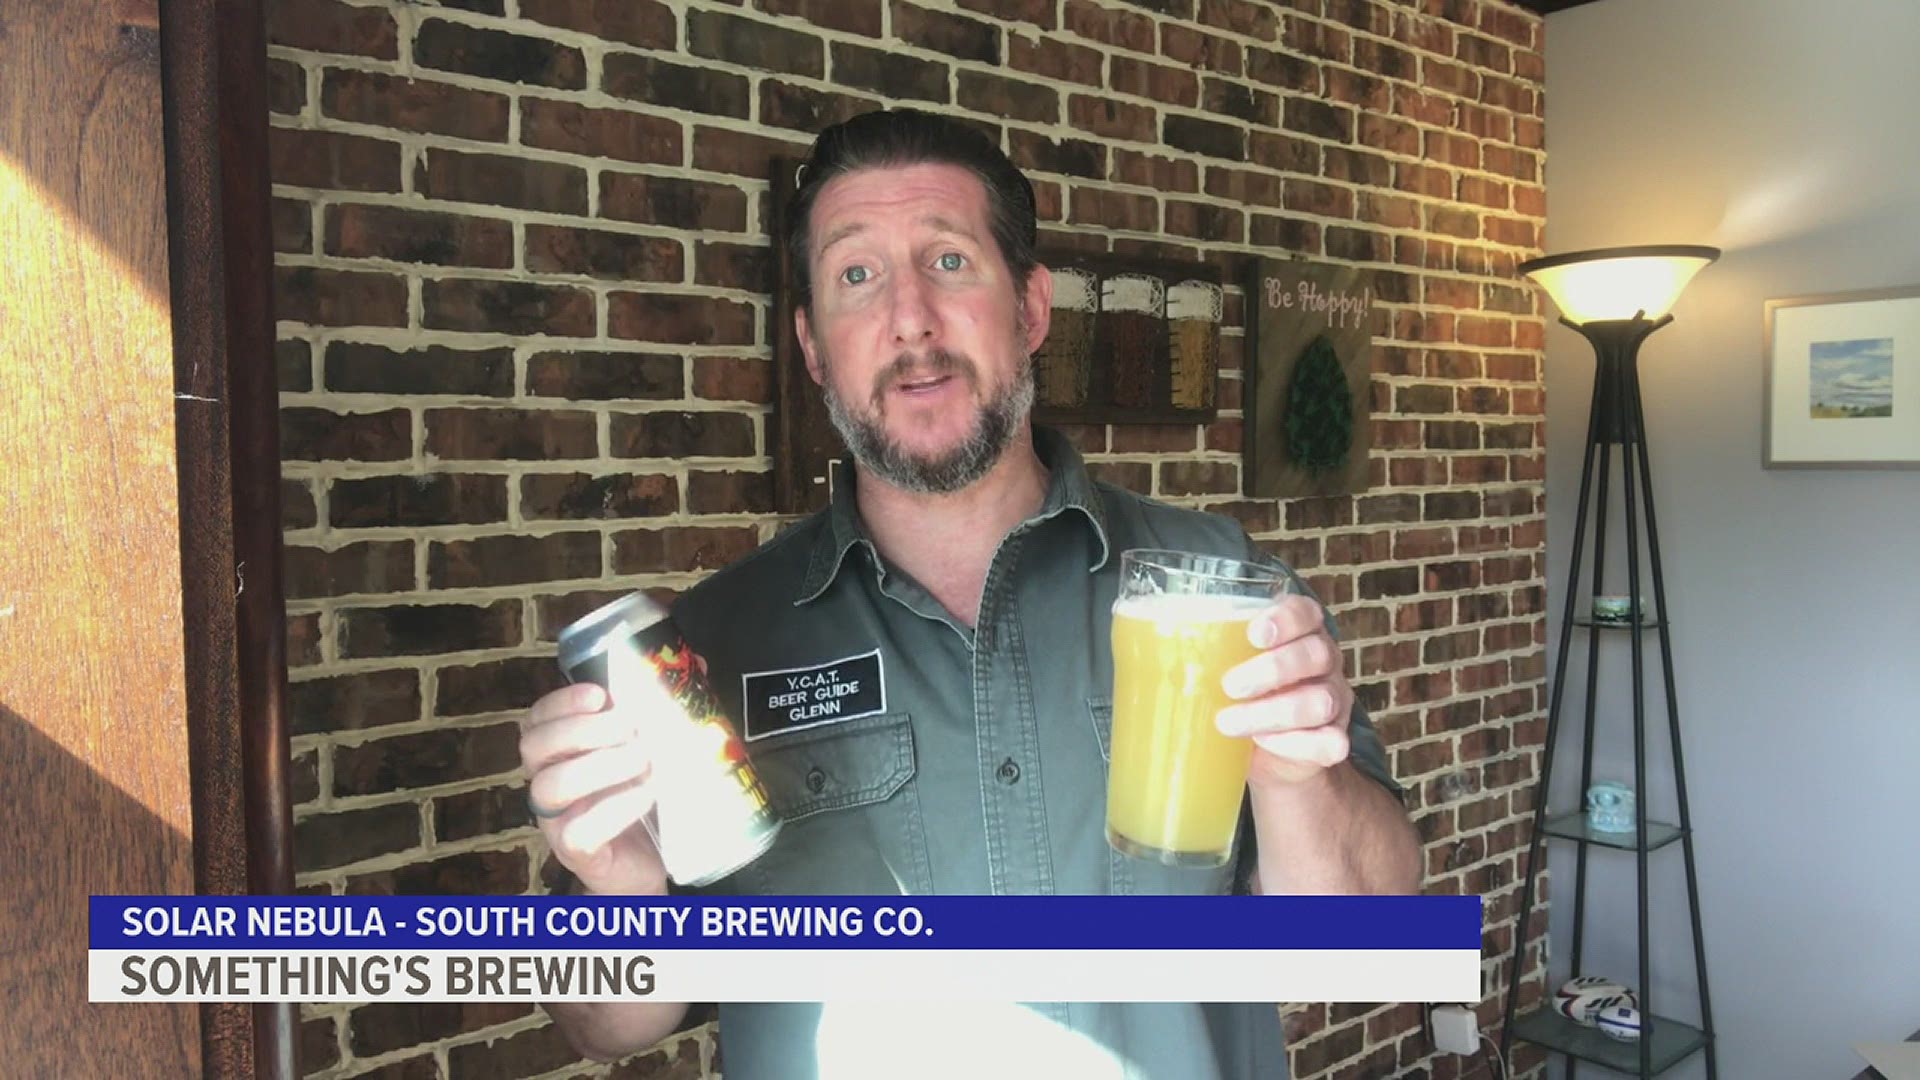 Glenn Smith, Founder of the York County Ale Trail, embraces the spirit of the holiday.